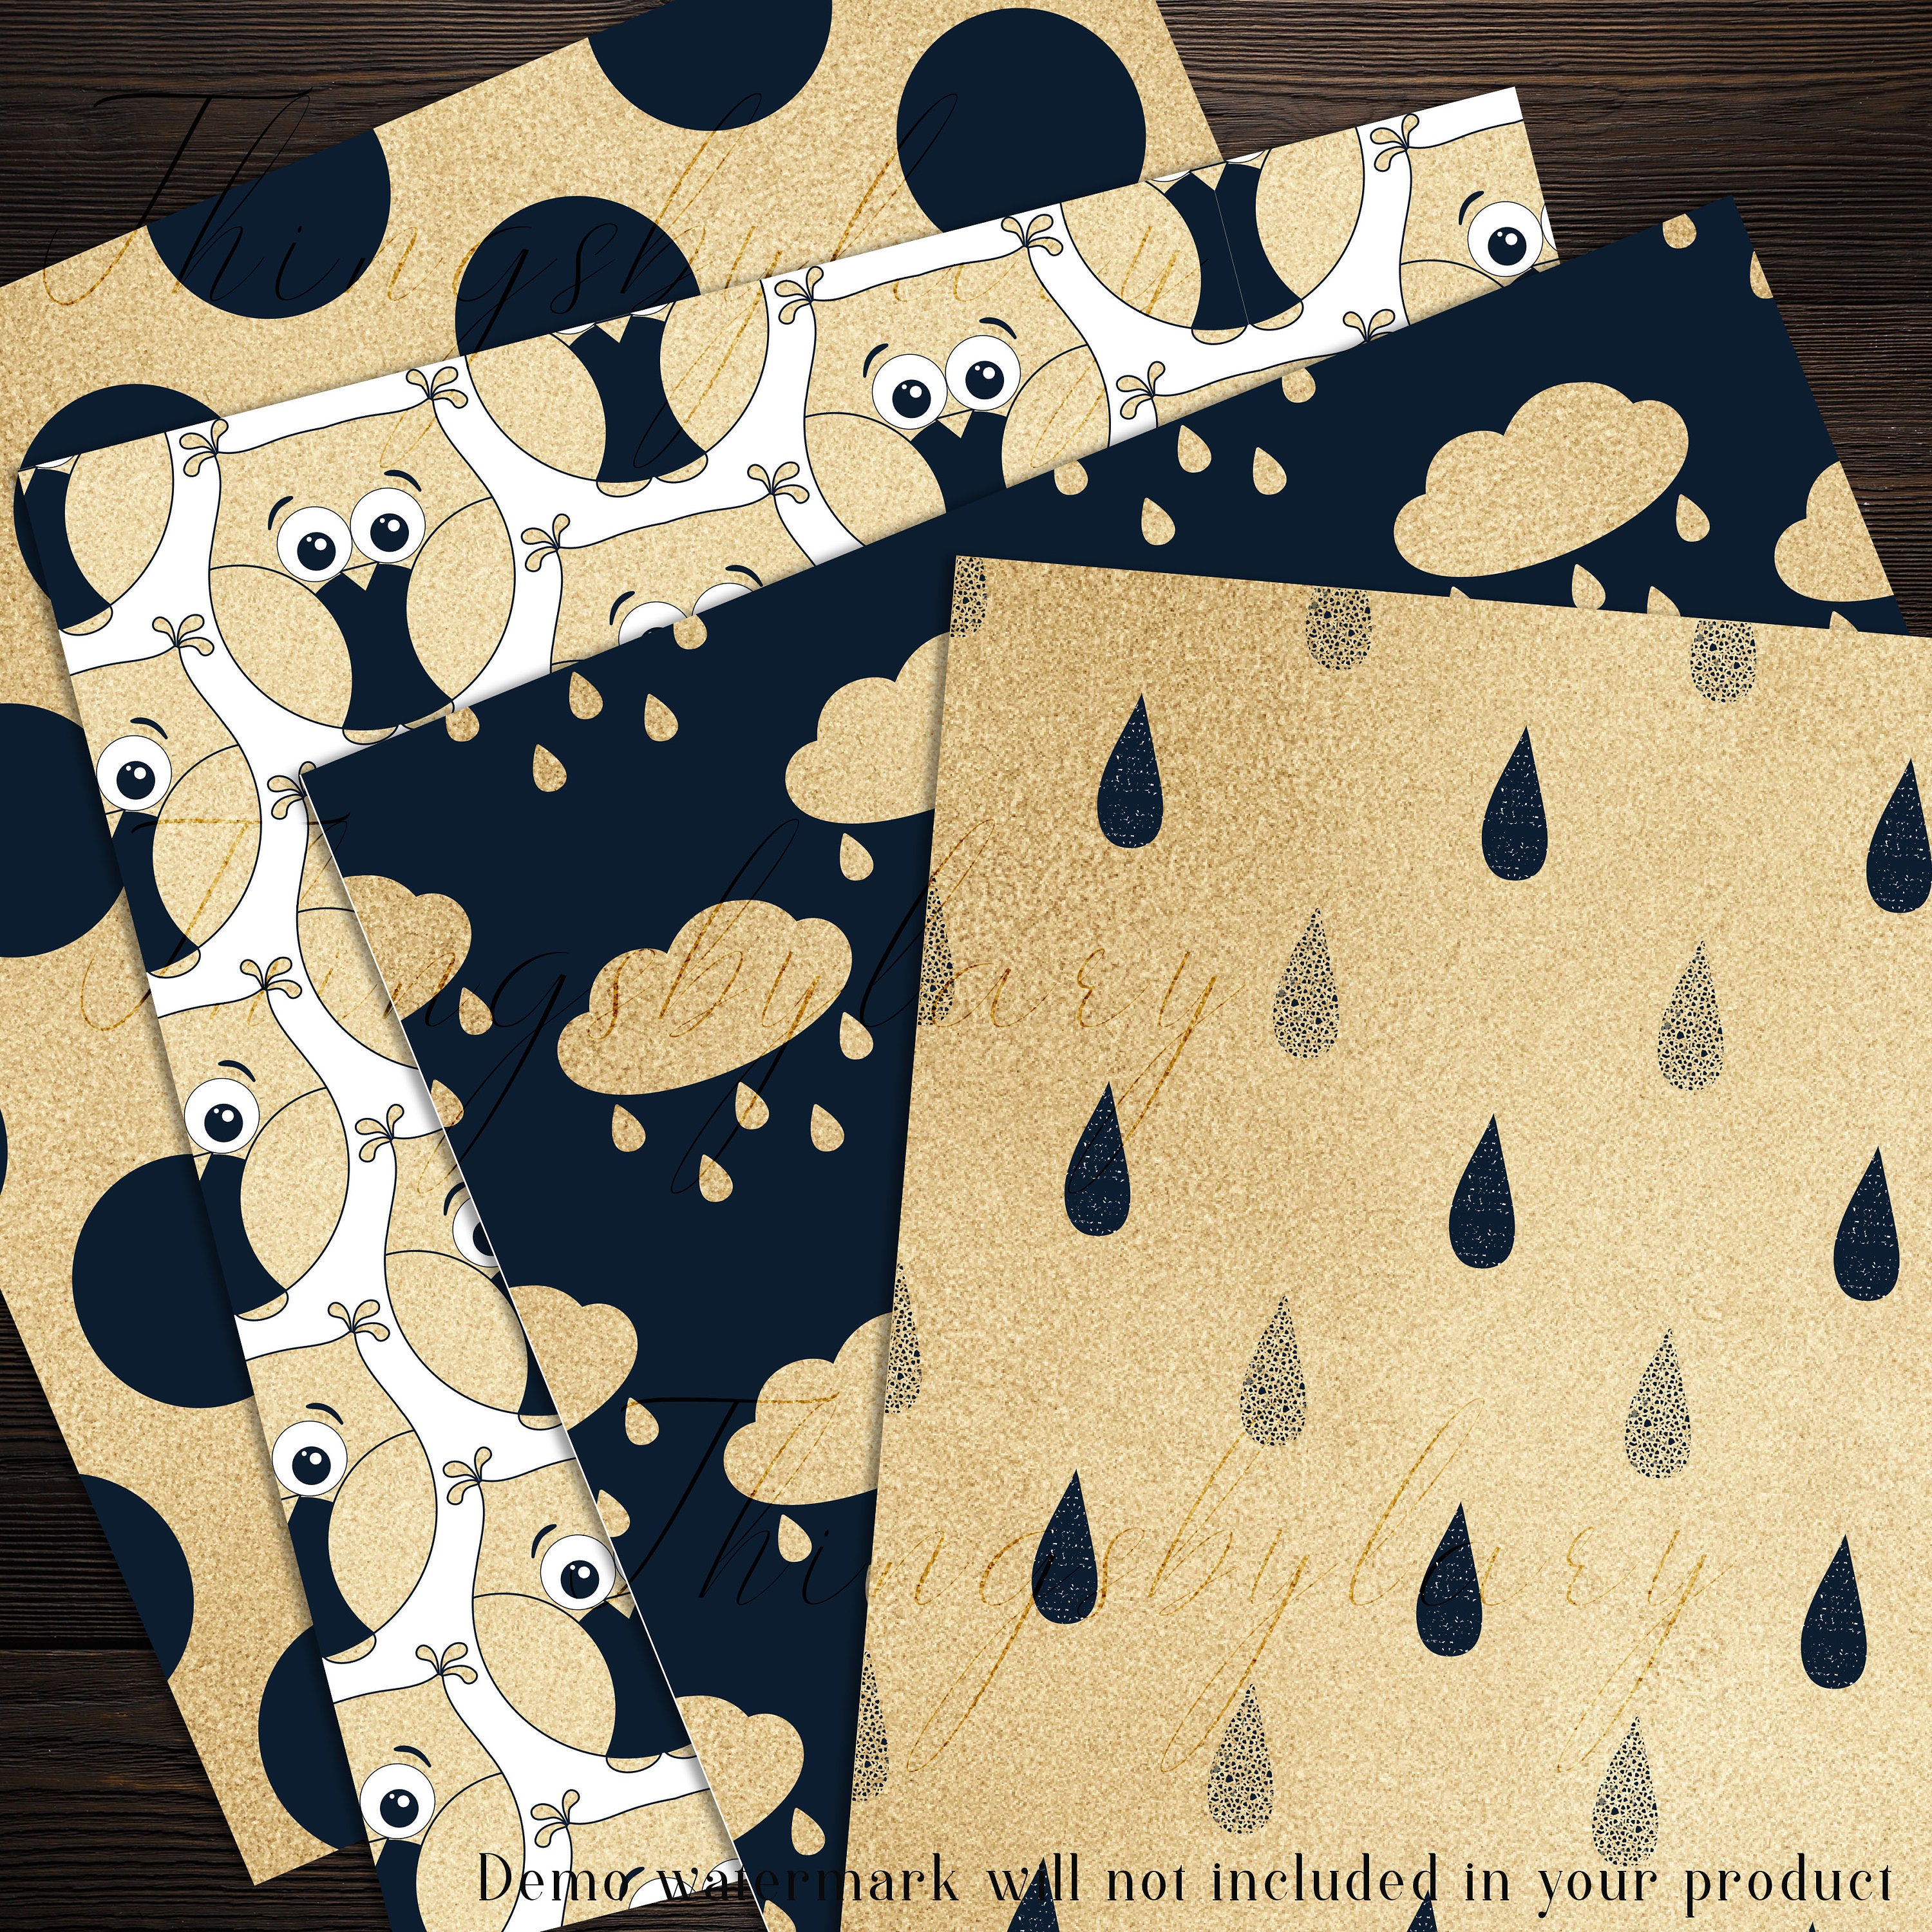 16 Cute Owl Pattern Gold Foil and Navy Blue Digital Papers in 12 x 12 inch 300 Dpi Instant Download, Scrapbook Papers, Commercial Use